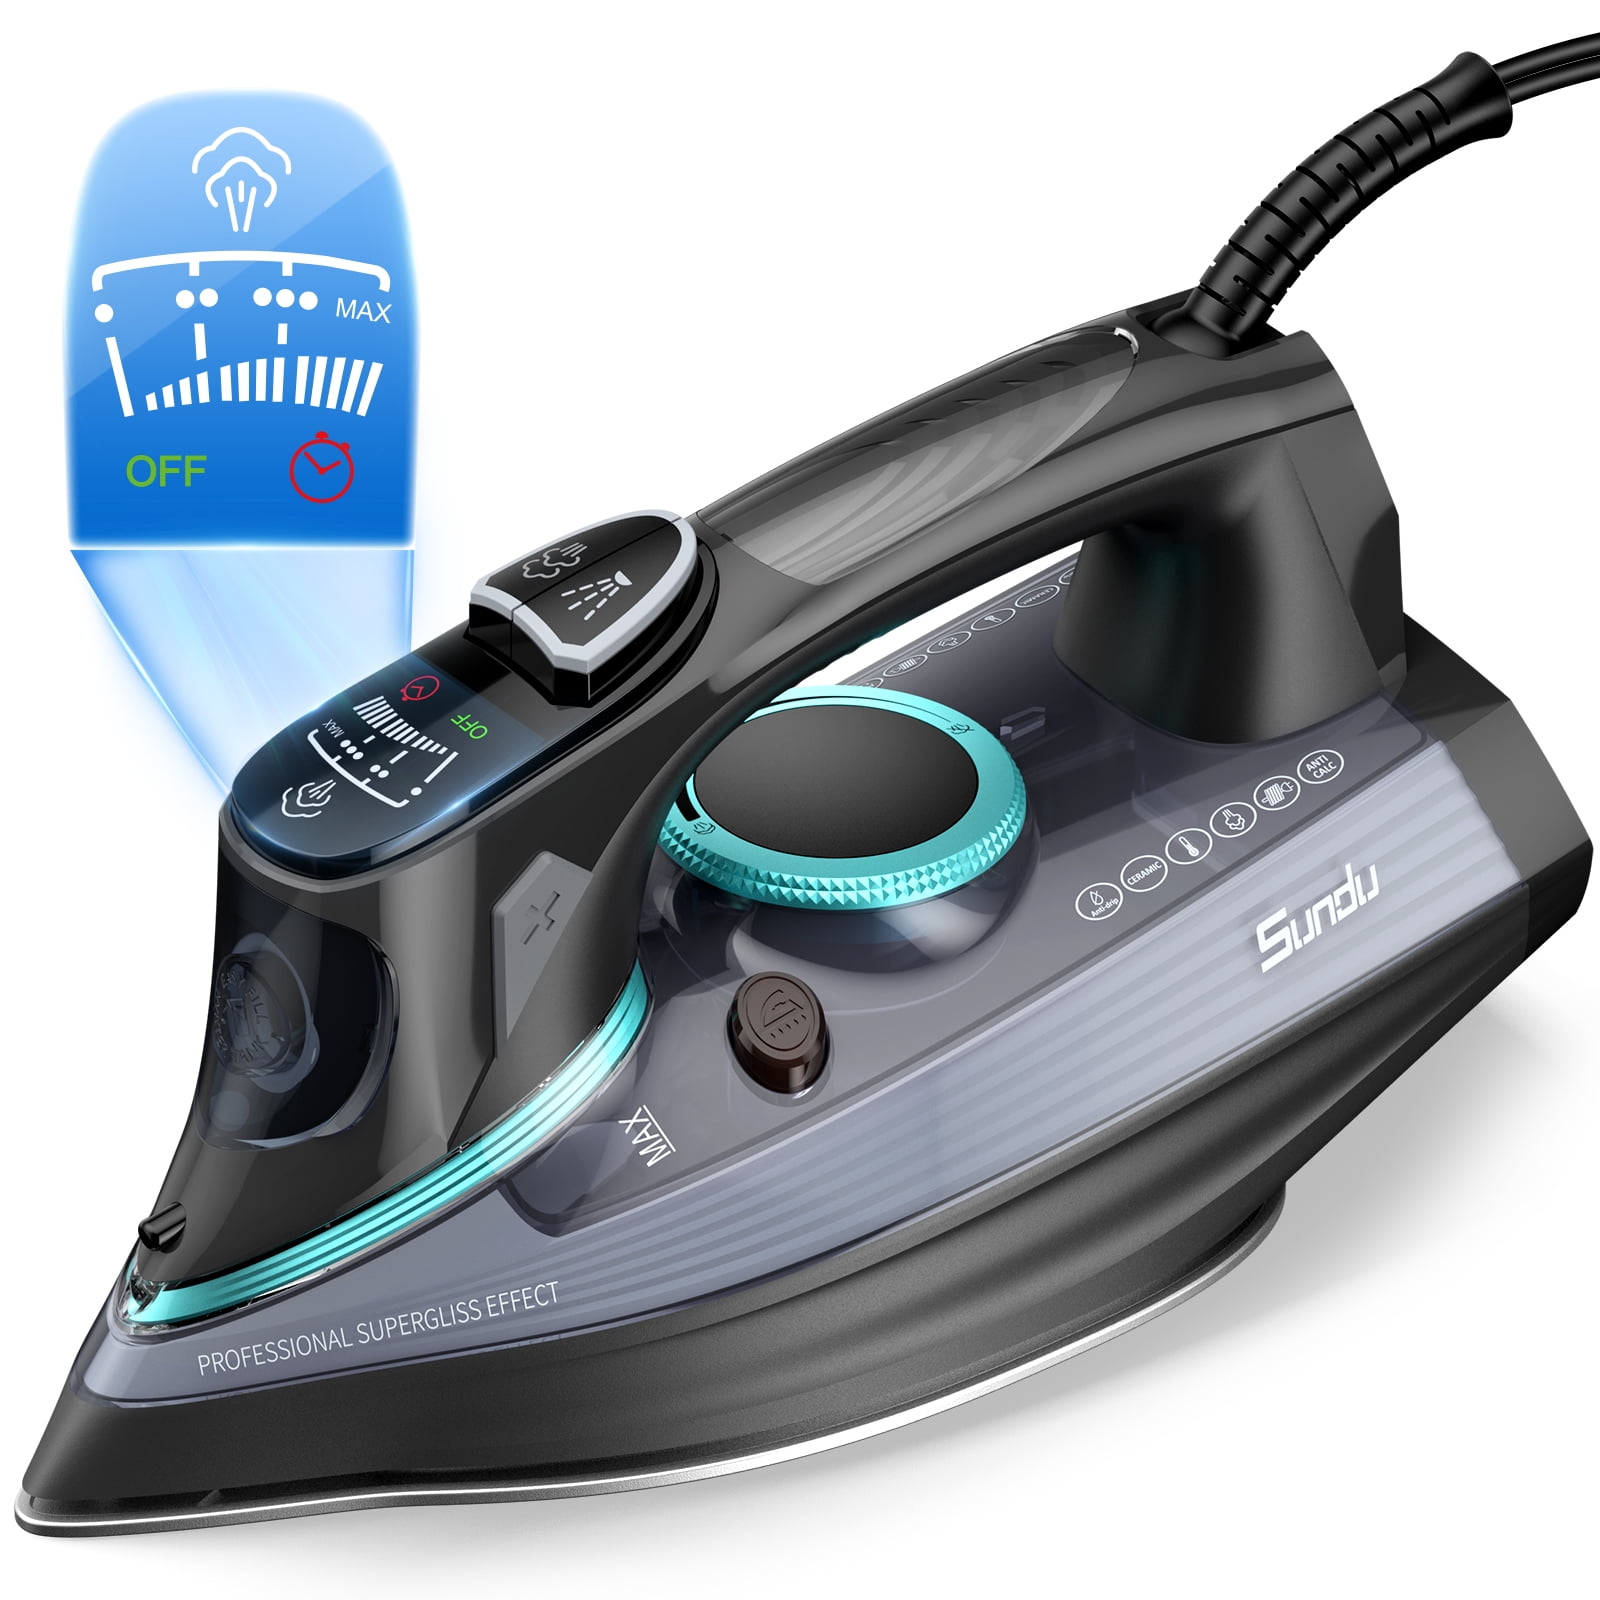 Steam Iron, 1600 Watts Steamer for Clothes, Self-Cleaning Portable Iron -  Bed Bath & Beyond - 36116966